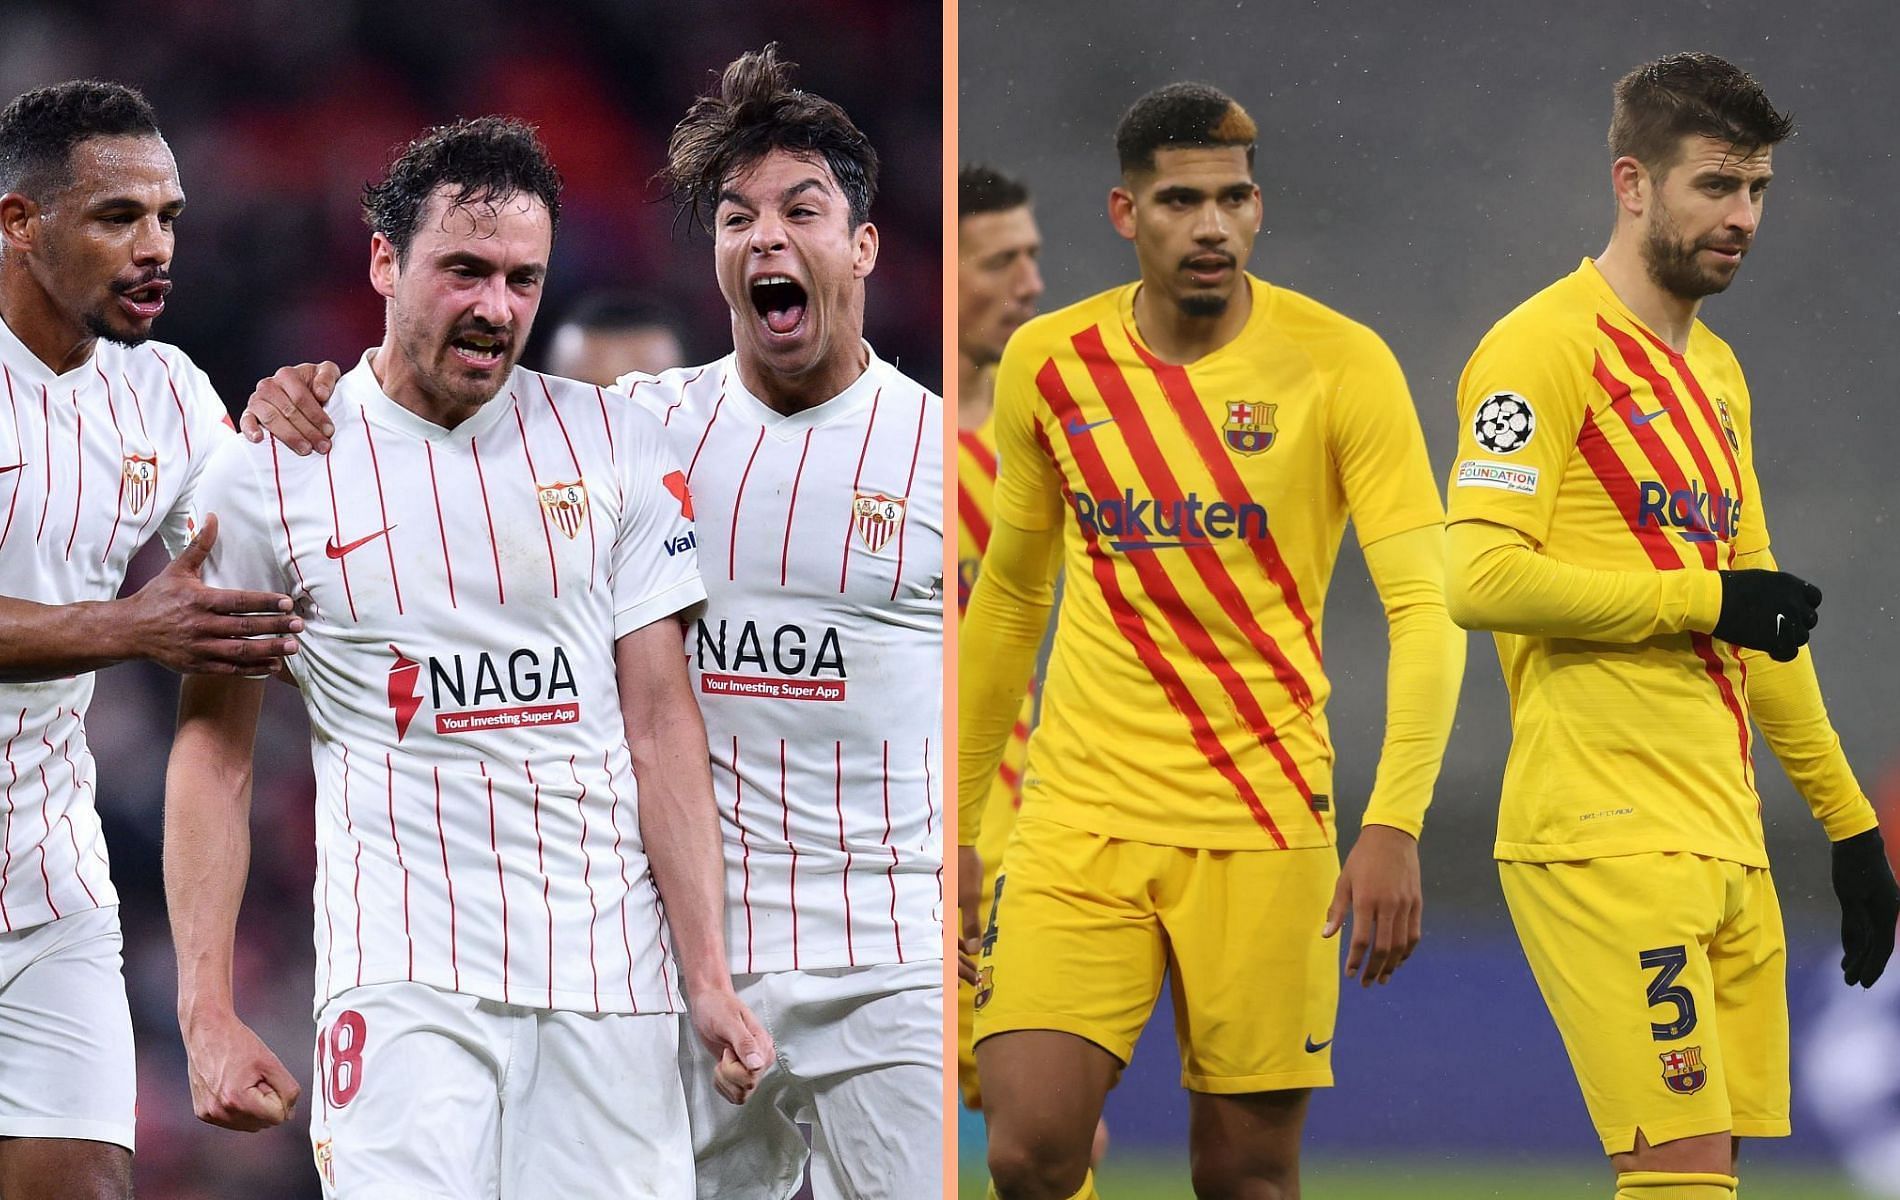 The Europa League knockout stage features a few top Spanish sides.